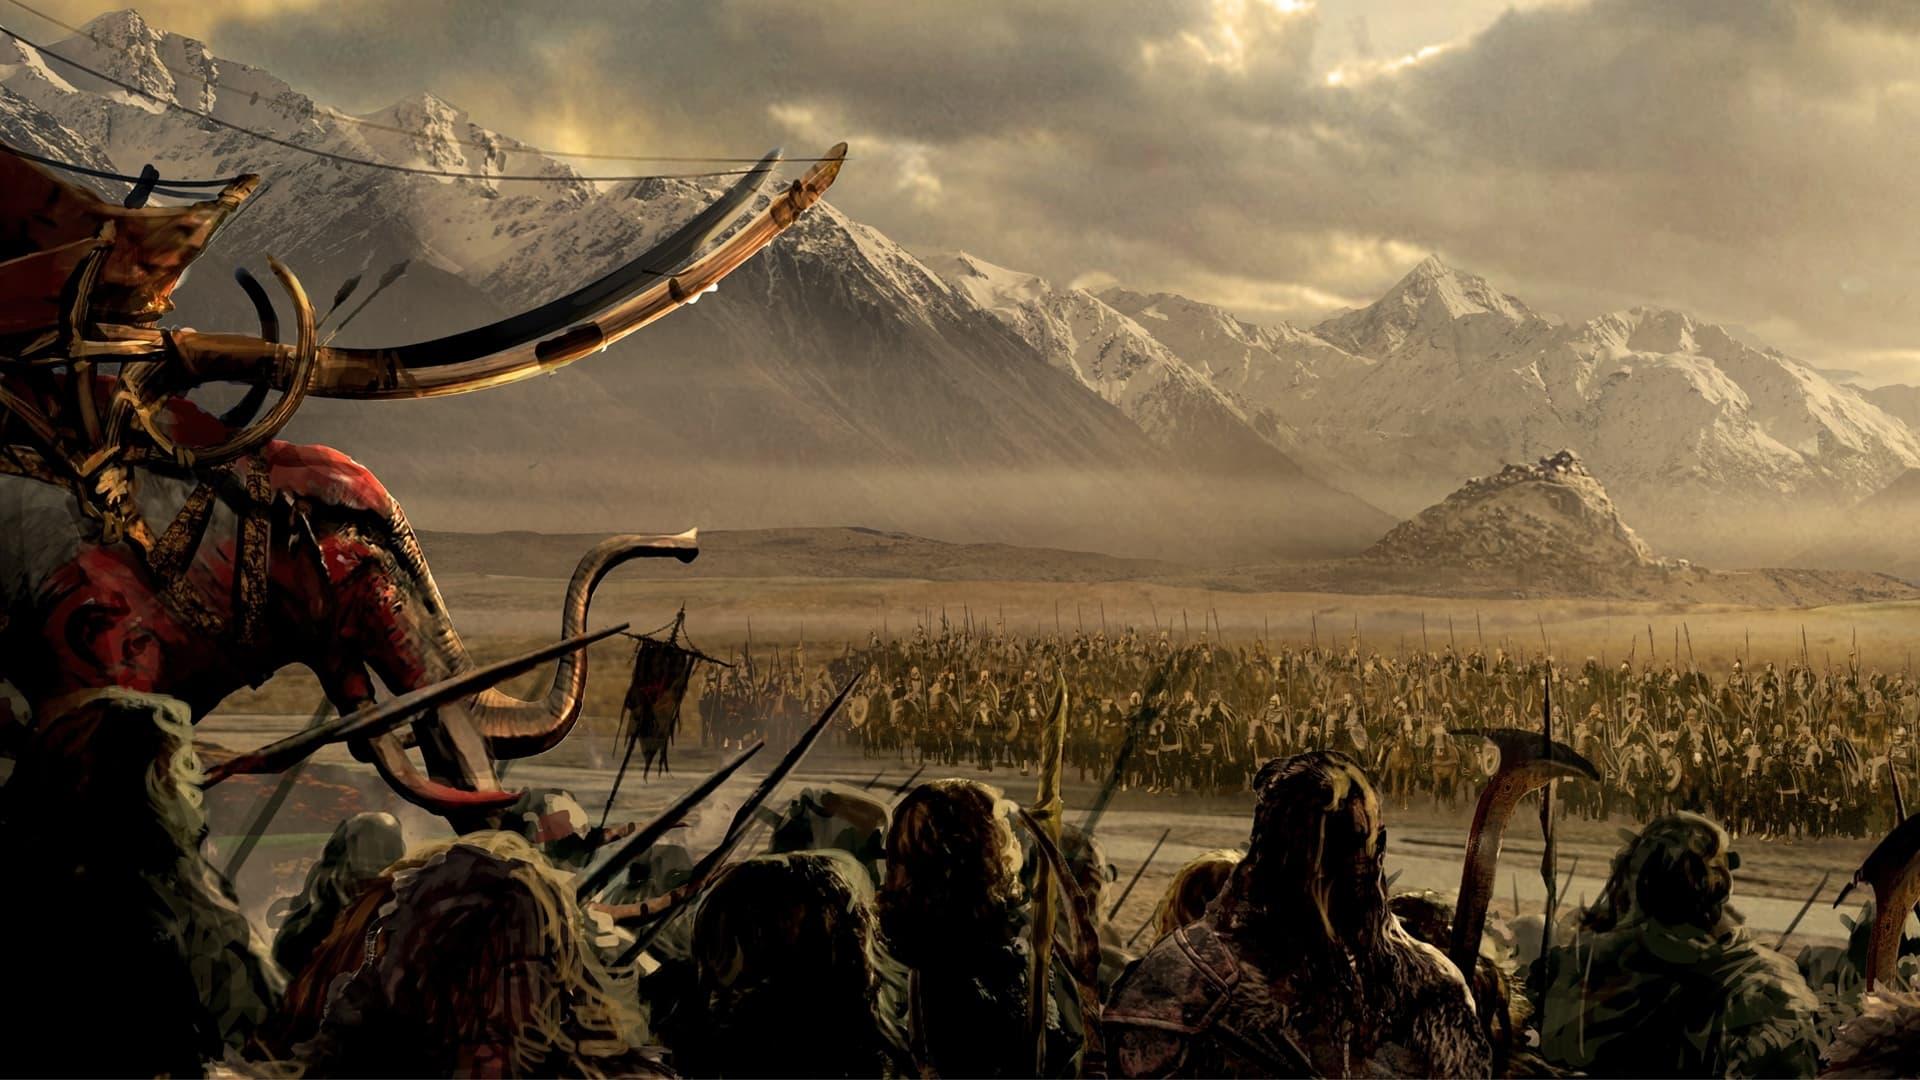 The Lord of the Rings: The War of the Rohirrim backdrop